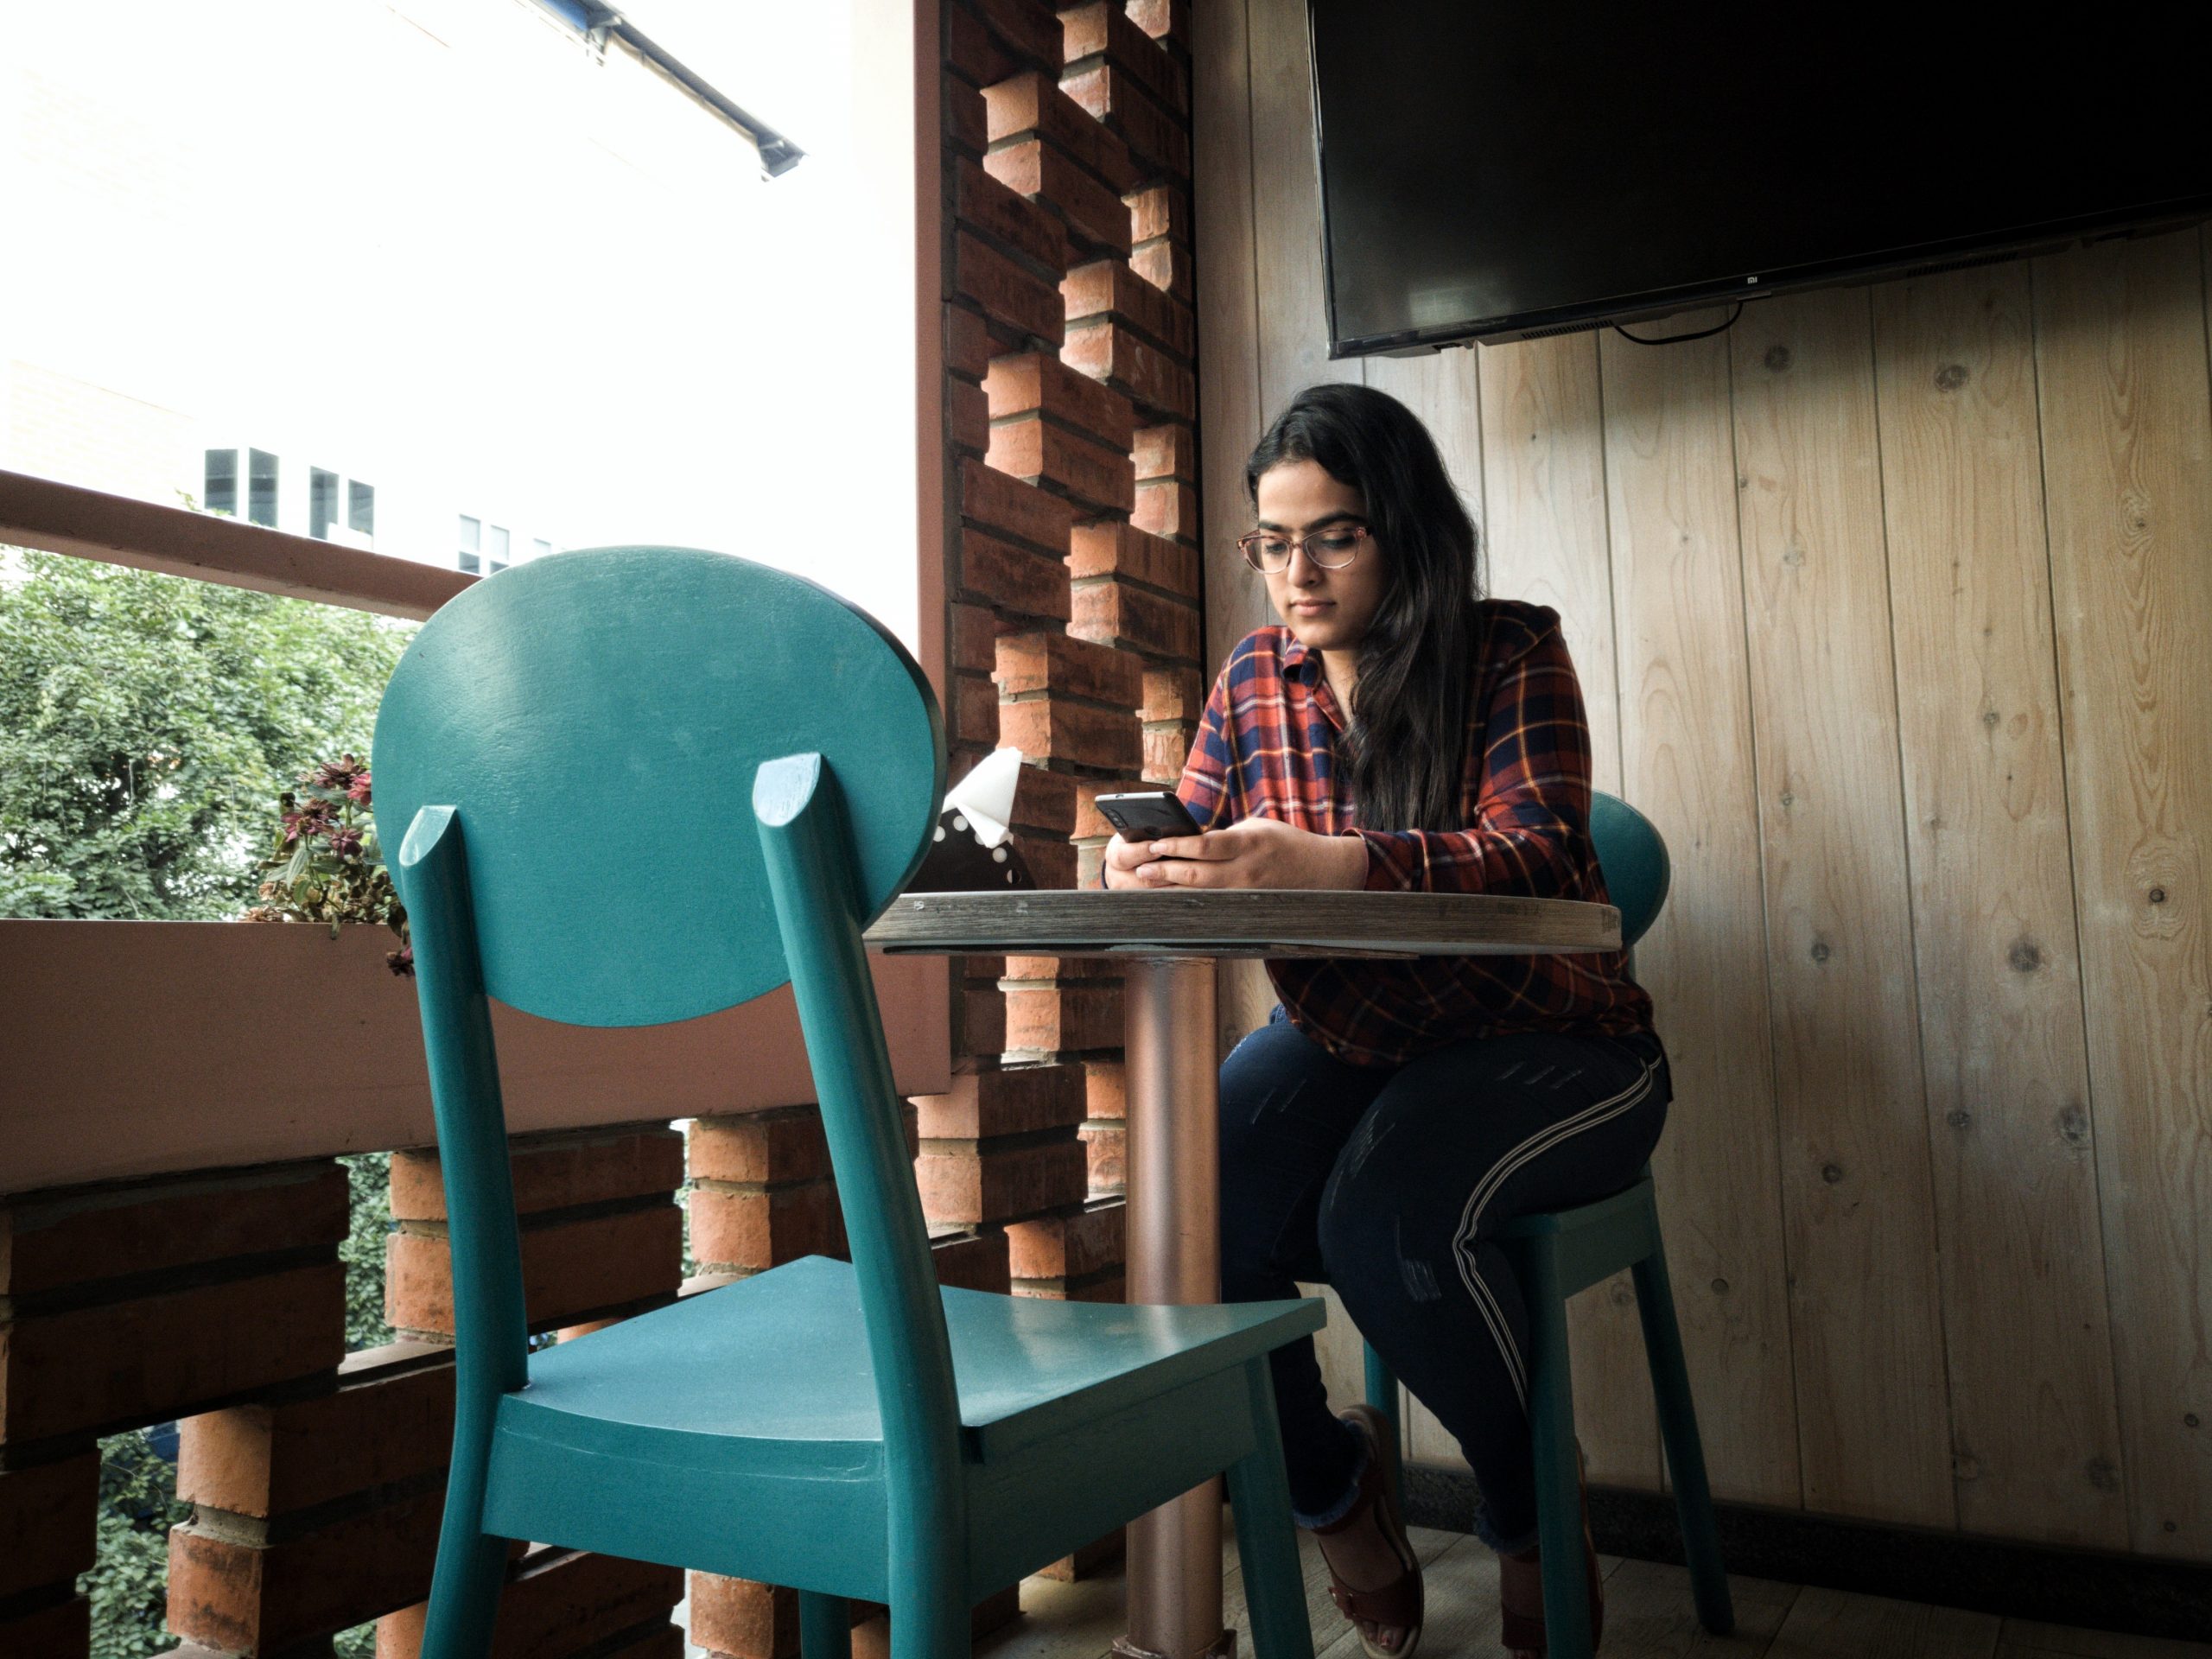 Indian woman in cafe with mobile phone